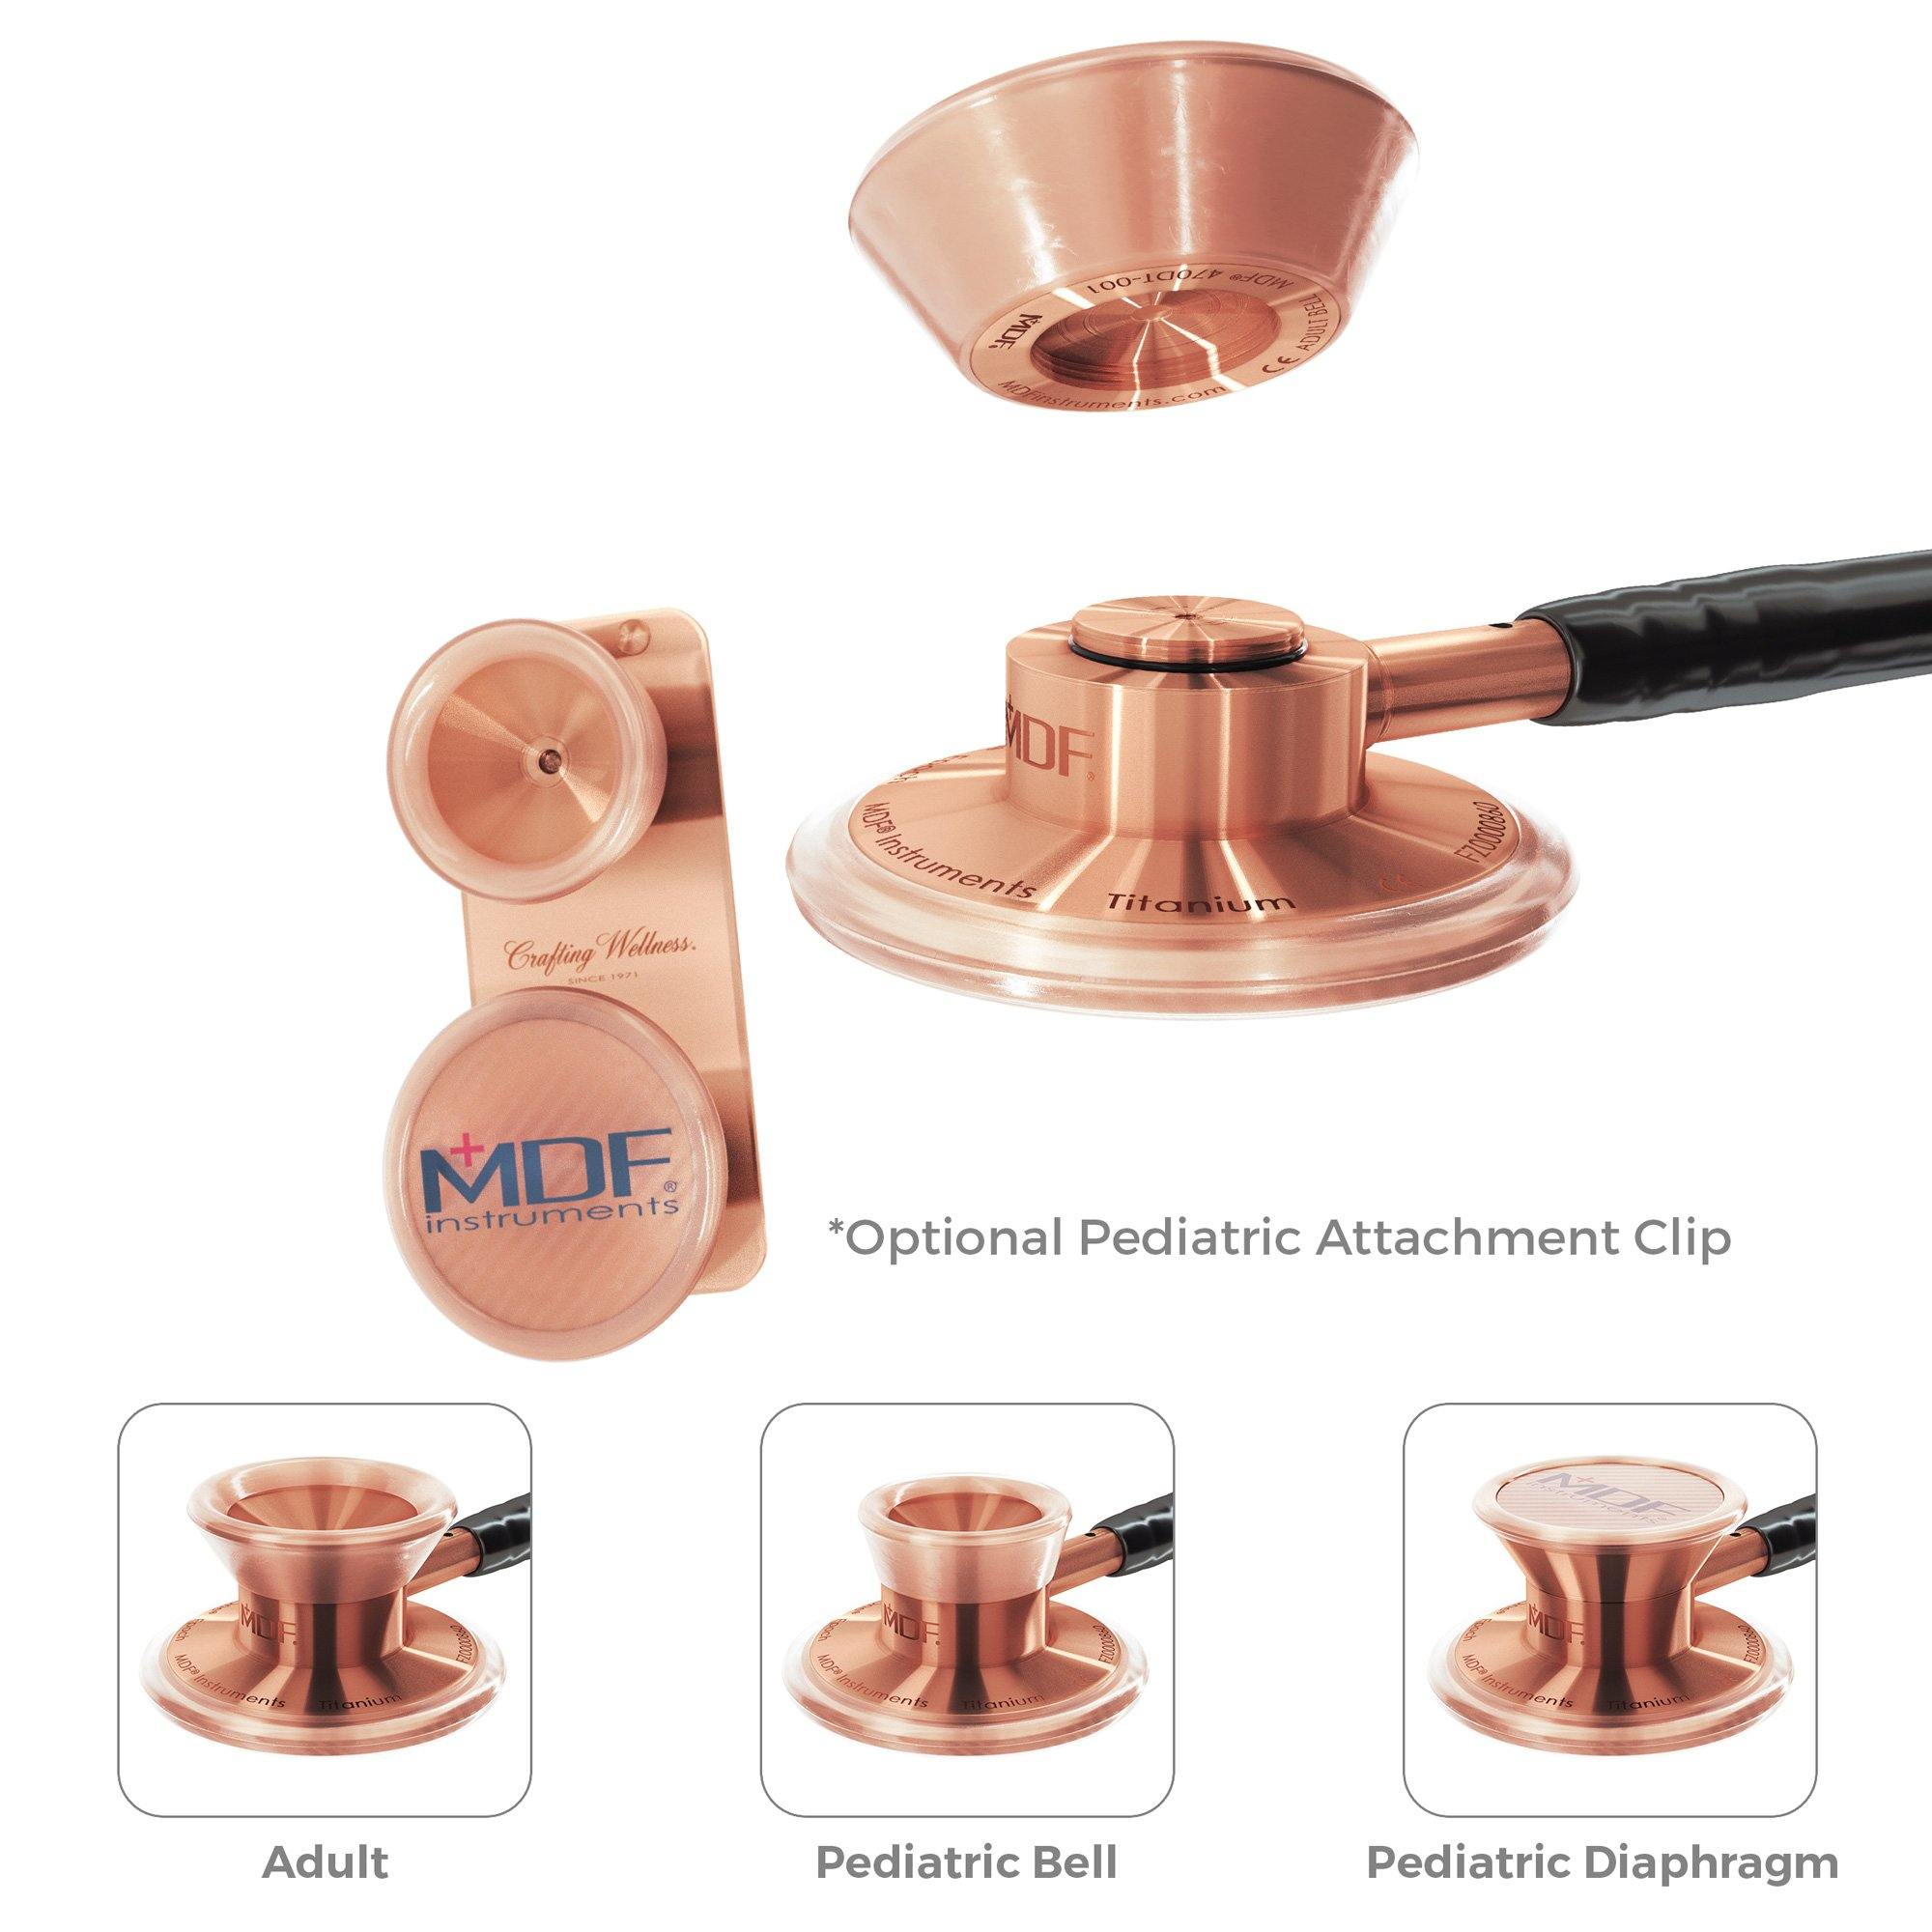 MD One® Epoch® Titanium Adult Stethoscope - Monet/Rose Gold - MDF Instruments Official Store - Stethoscope